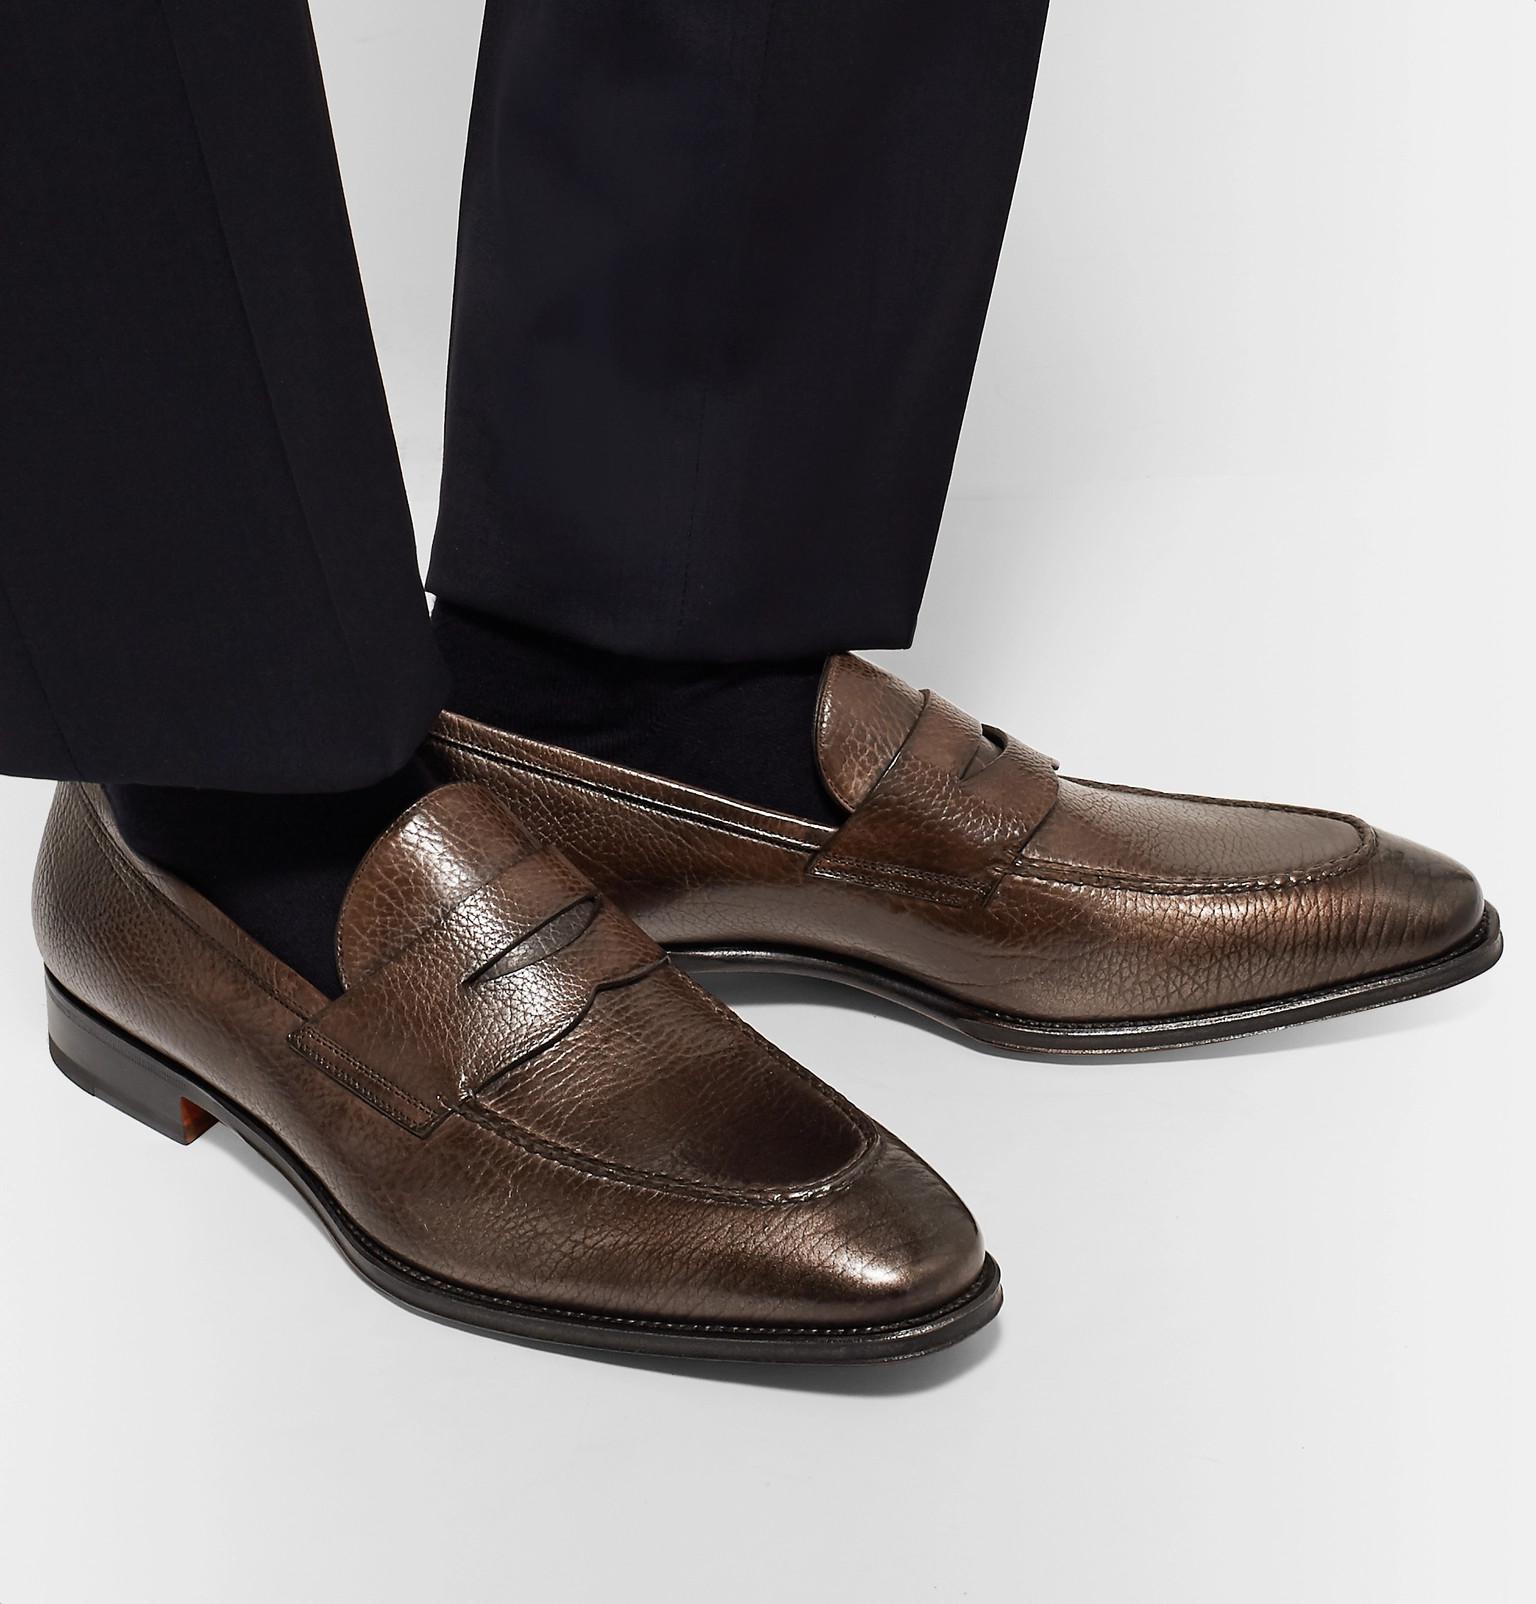 7 Details about   $620 SANTONI Brown Leather Perforated Unlined Venetian Loafers 